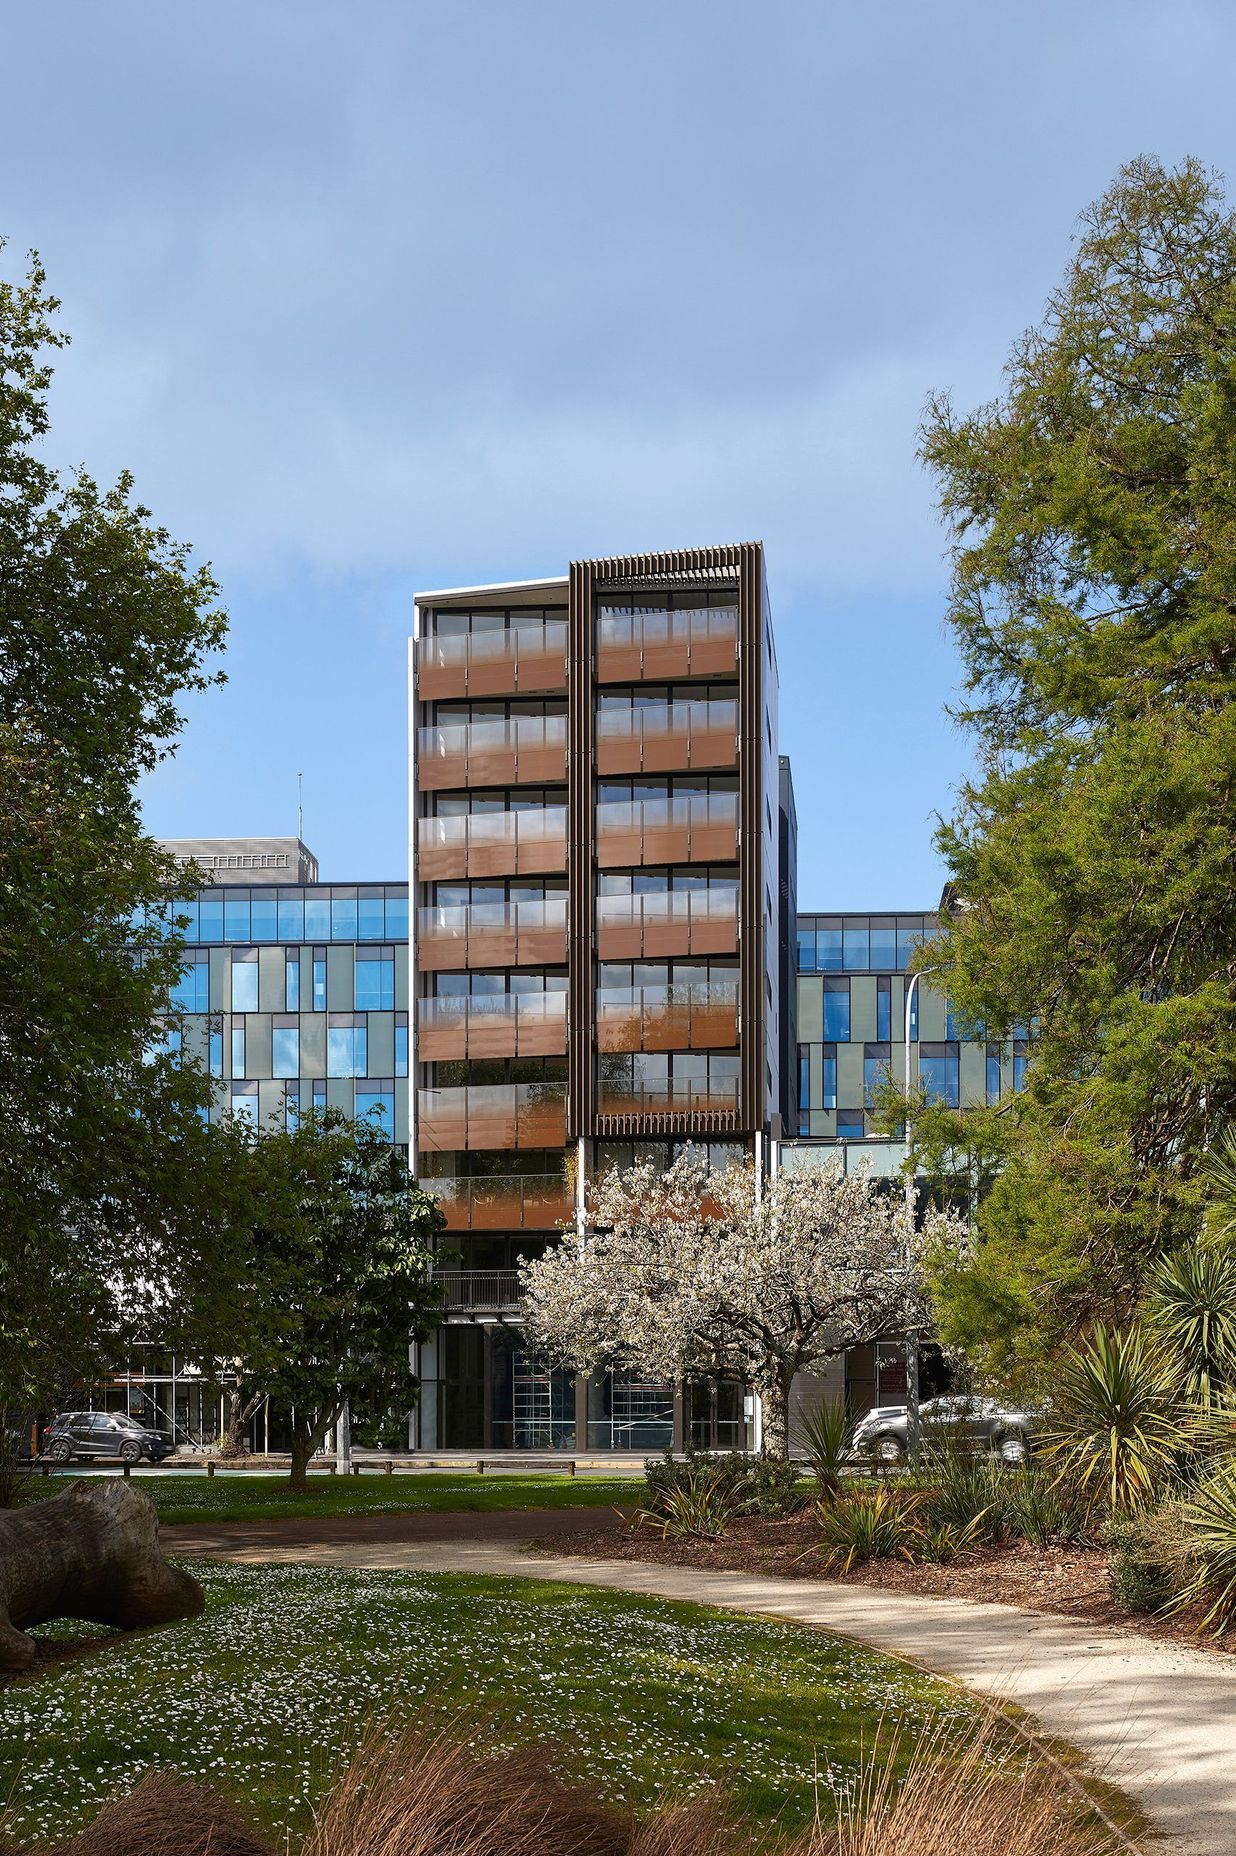 Located opposite Auckland's Victoria Park and on the site of a former metal foundry, The Vulcan is a twin-tower boutique development comprising 38 freehold apartments.